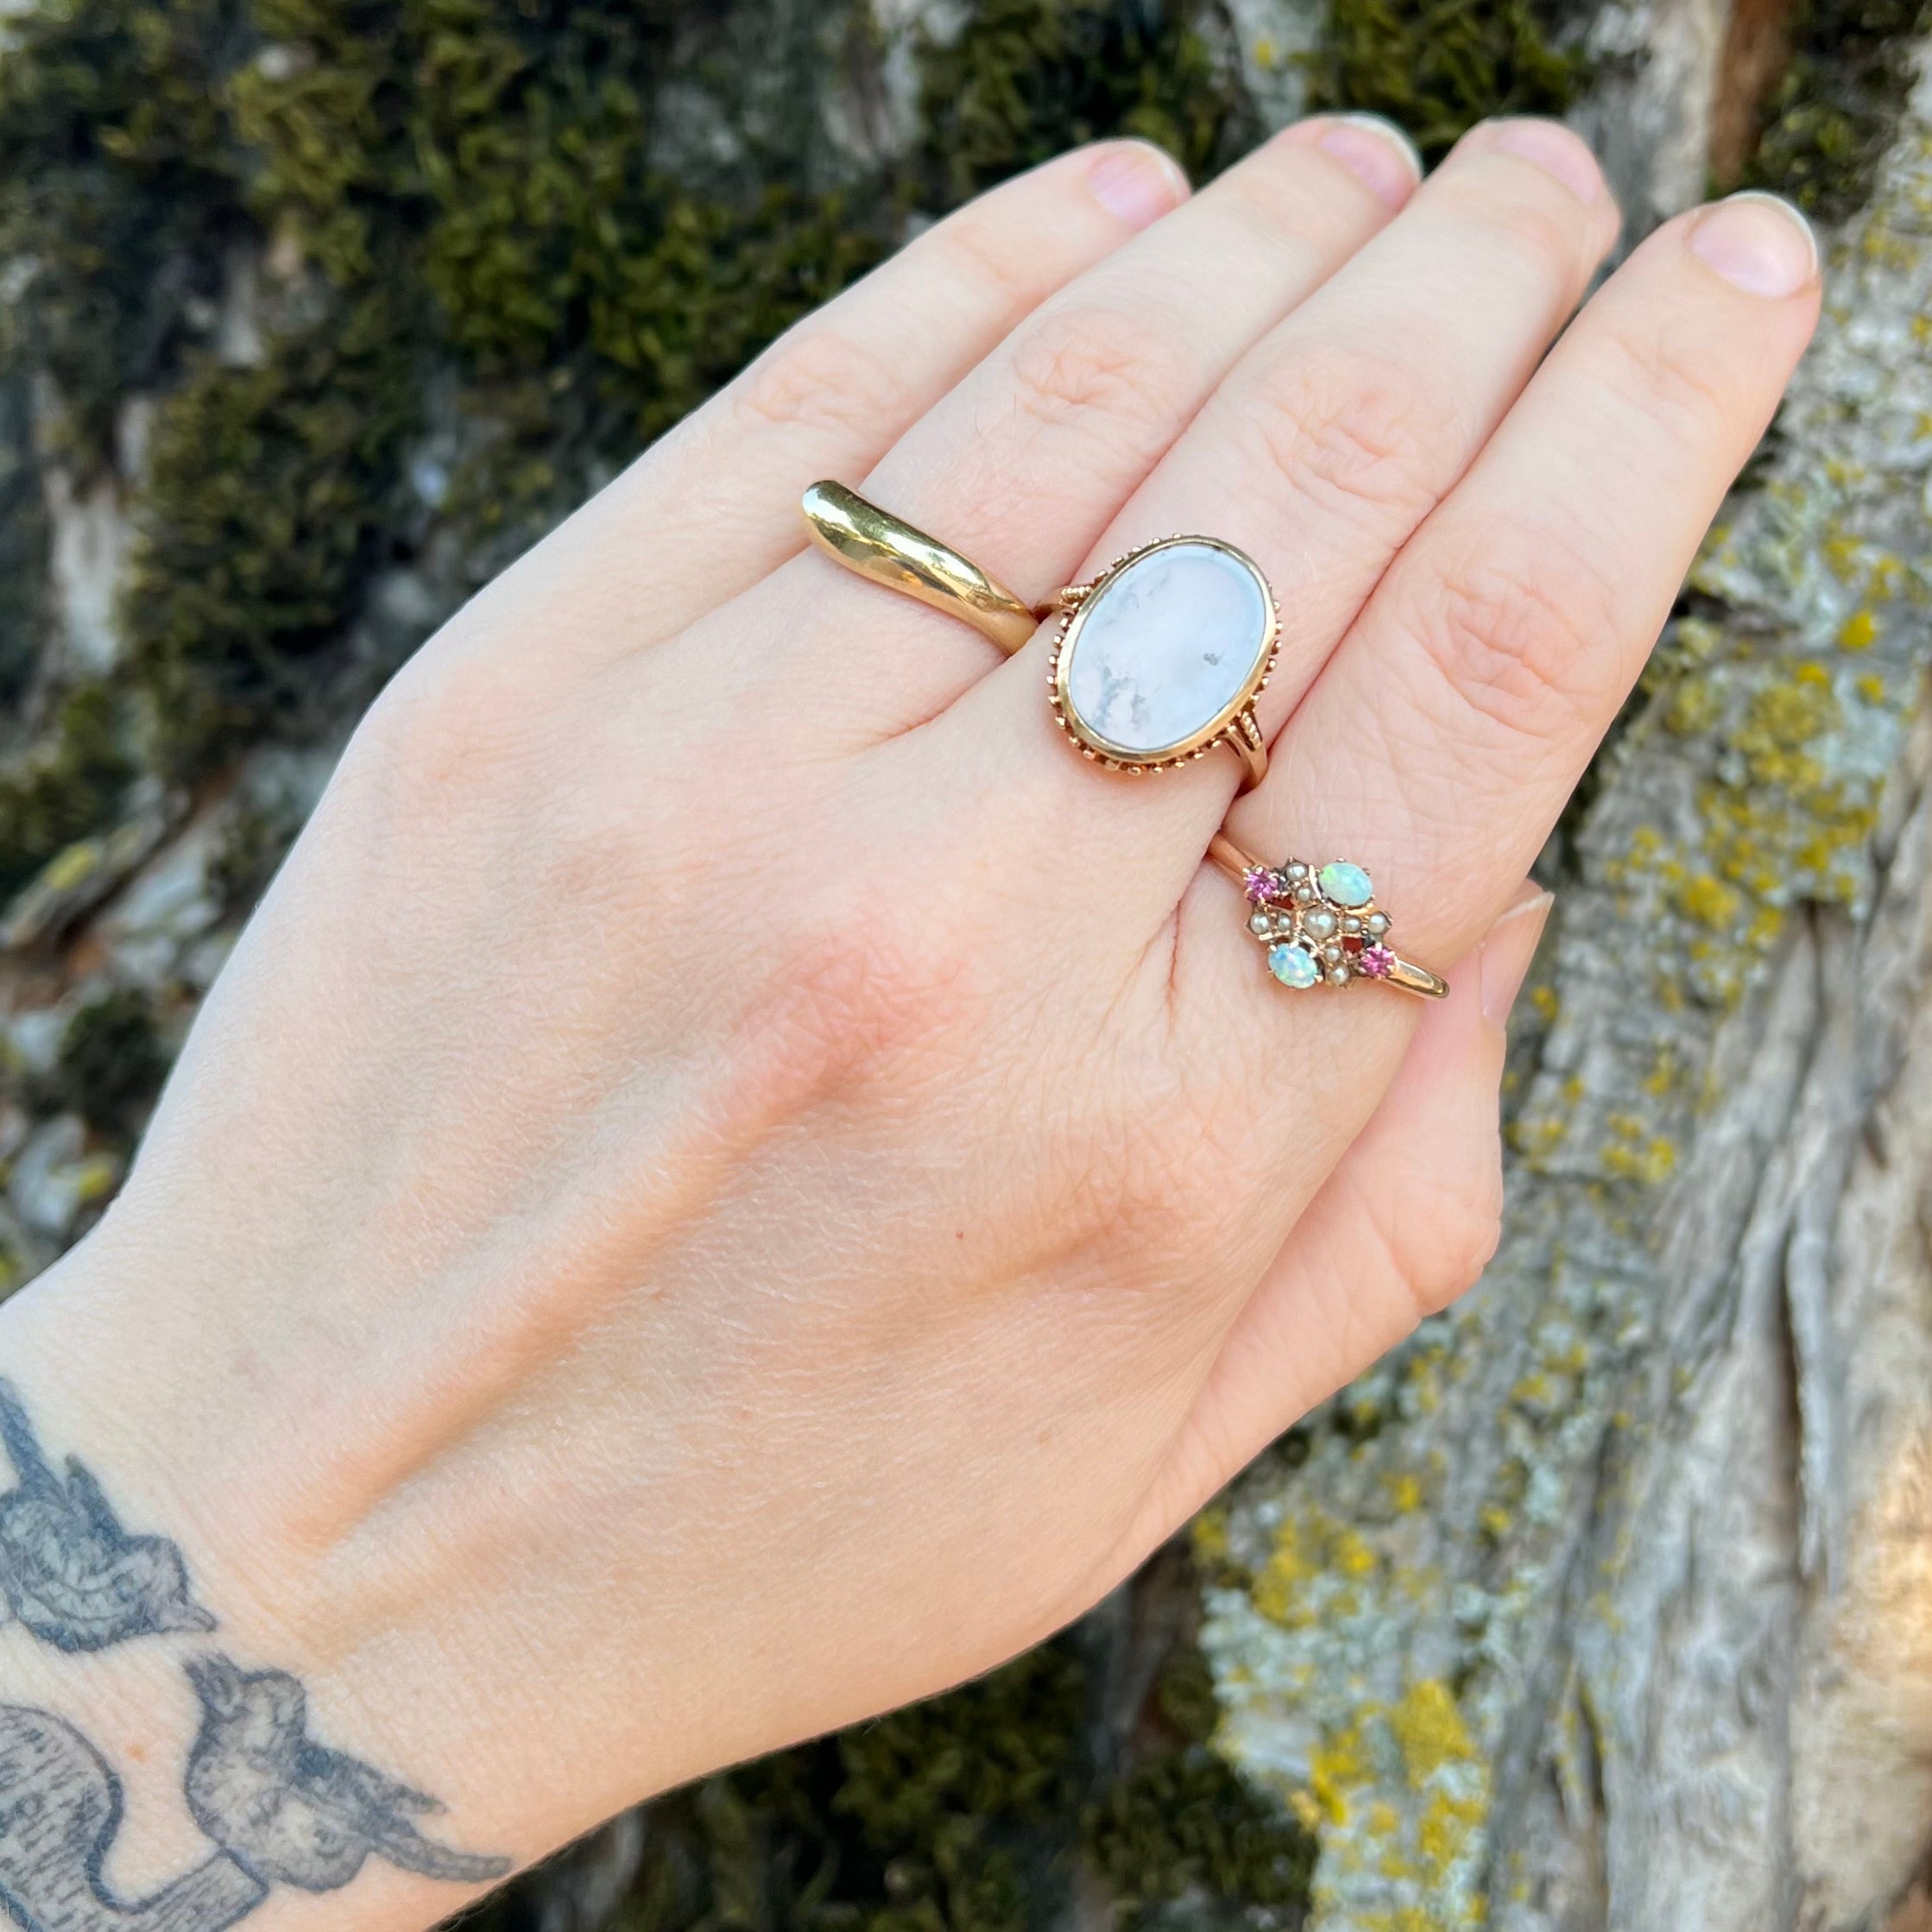 Antique 10k Gold Moss Agate Ring